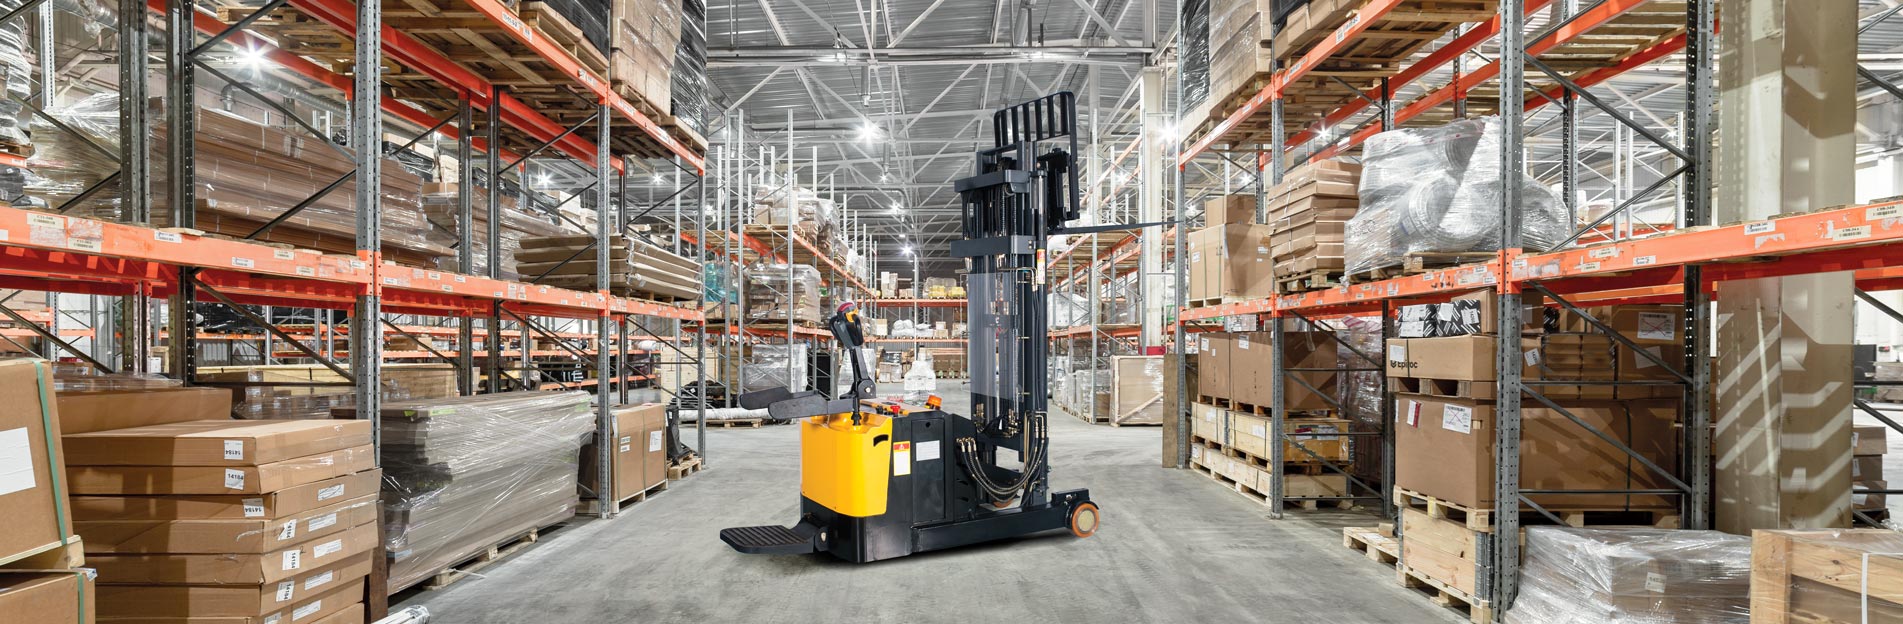 Liftsmart RT12-20 Electric Reach Stacker